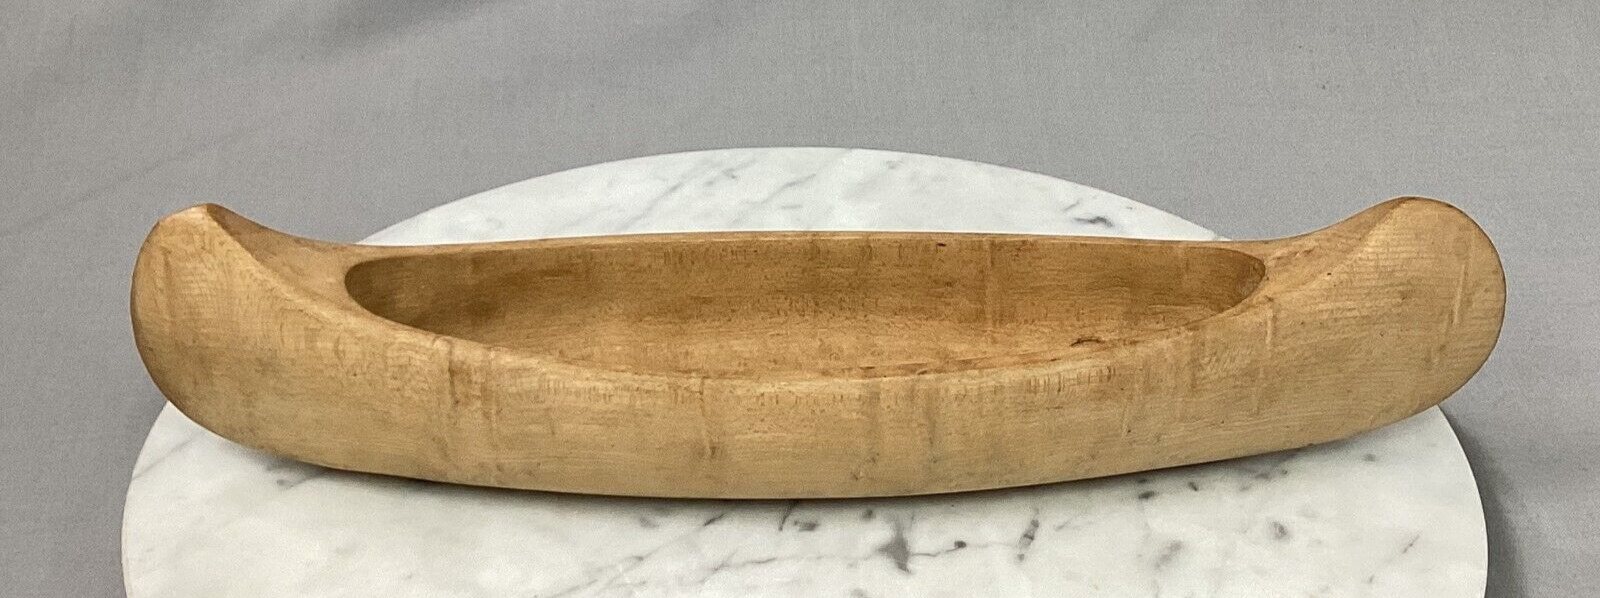 Birch Wood Carved Model Canoe 12 In Long Country Cottage Decor